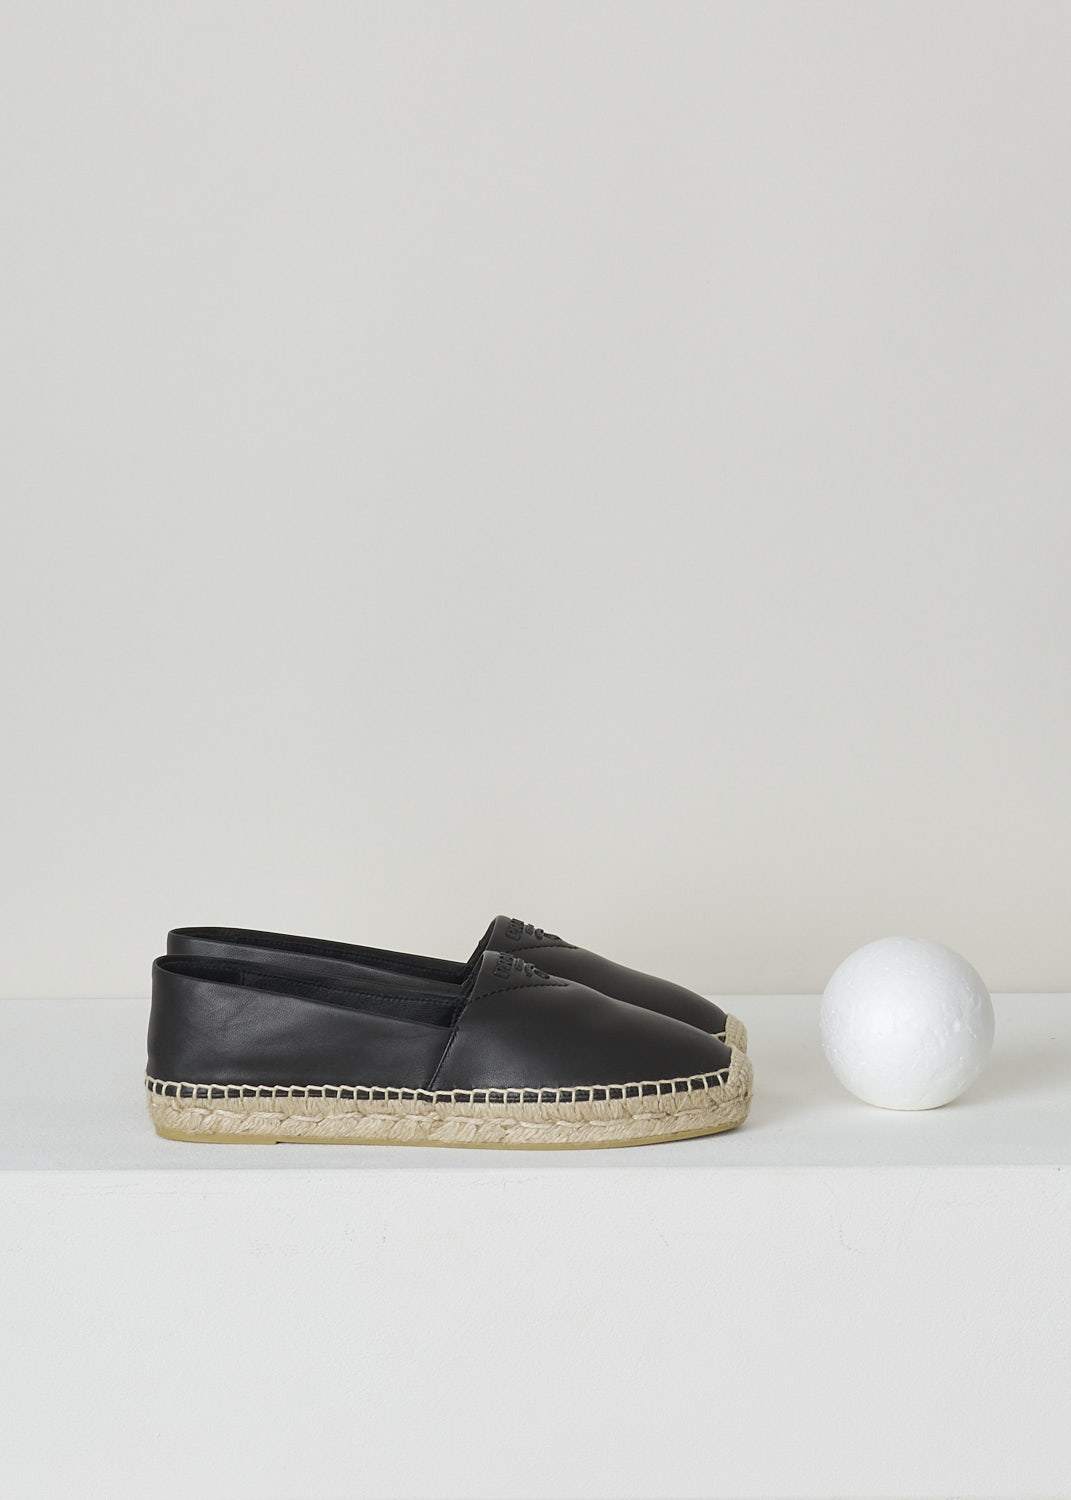 PRADA, BLACK LEATHER ESPADRILLES, NAPPA_1_1S871M_79N_F0002_NERO, Black, Side, These black, soft leather Espadrilles have a round toe that goes over into the braided jute soles. The brand's triangle logo can be found on the vamp.

